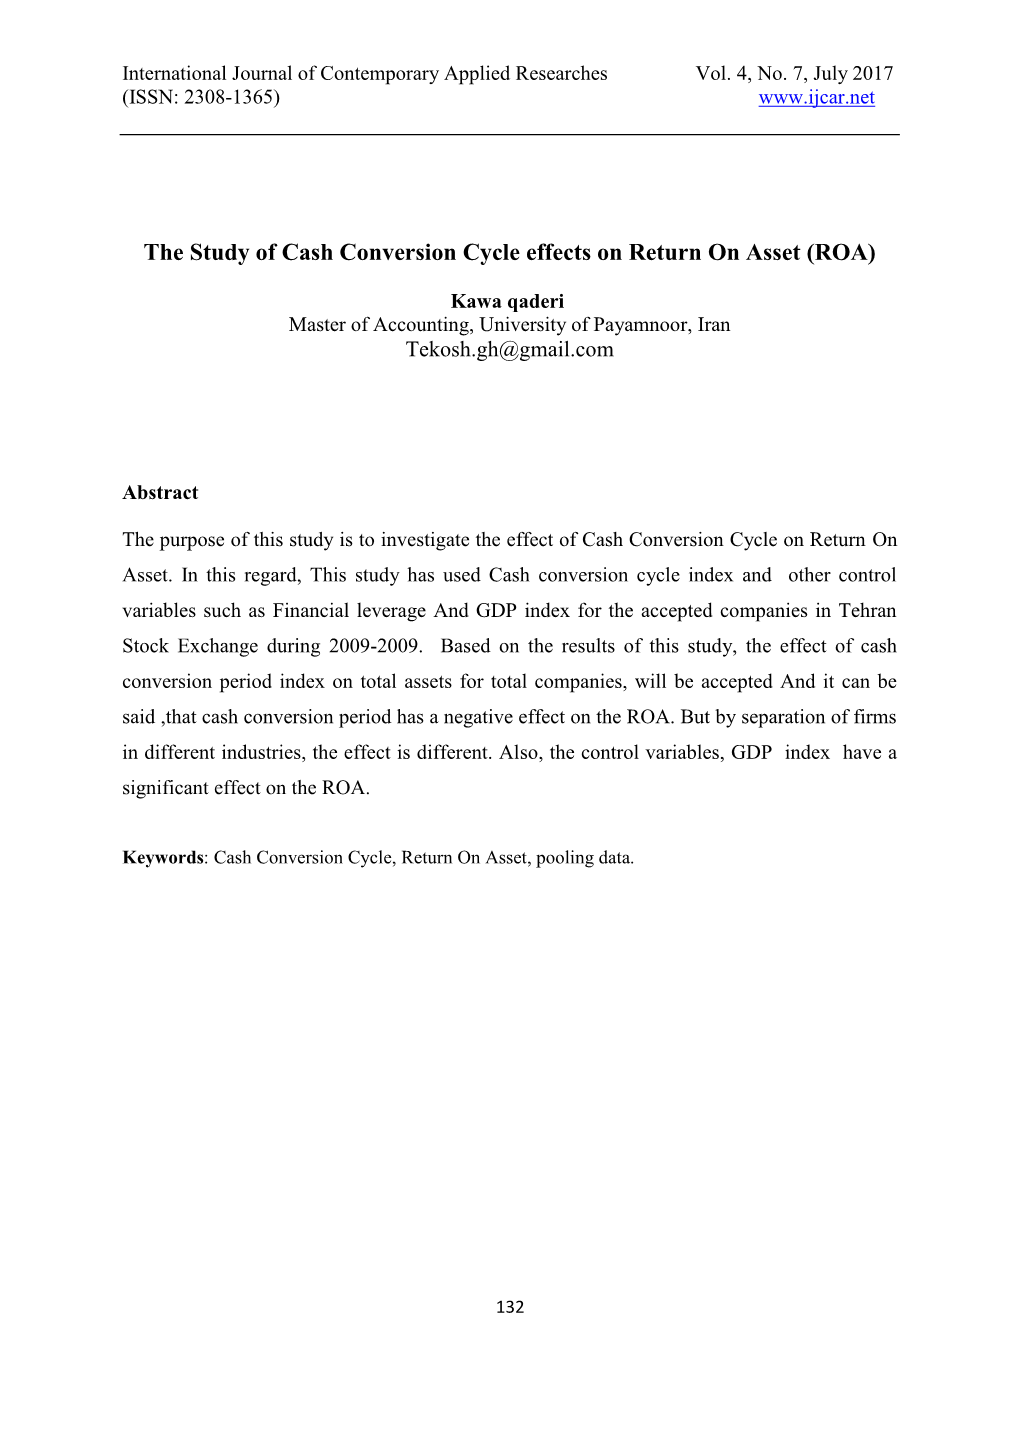 The Study of Cash Conversion Cycle Effects on Return on Asset (ROA)